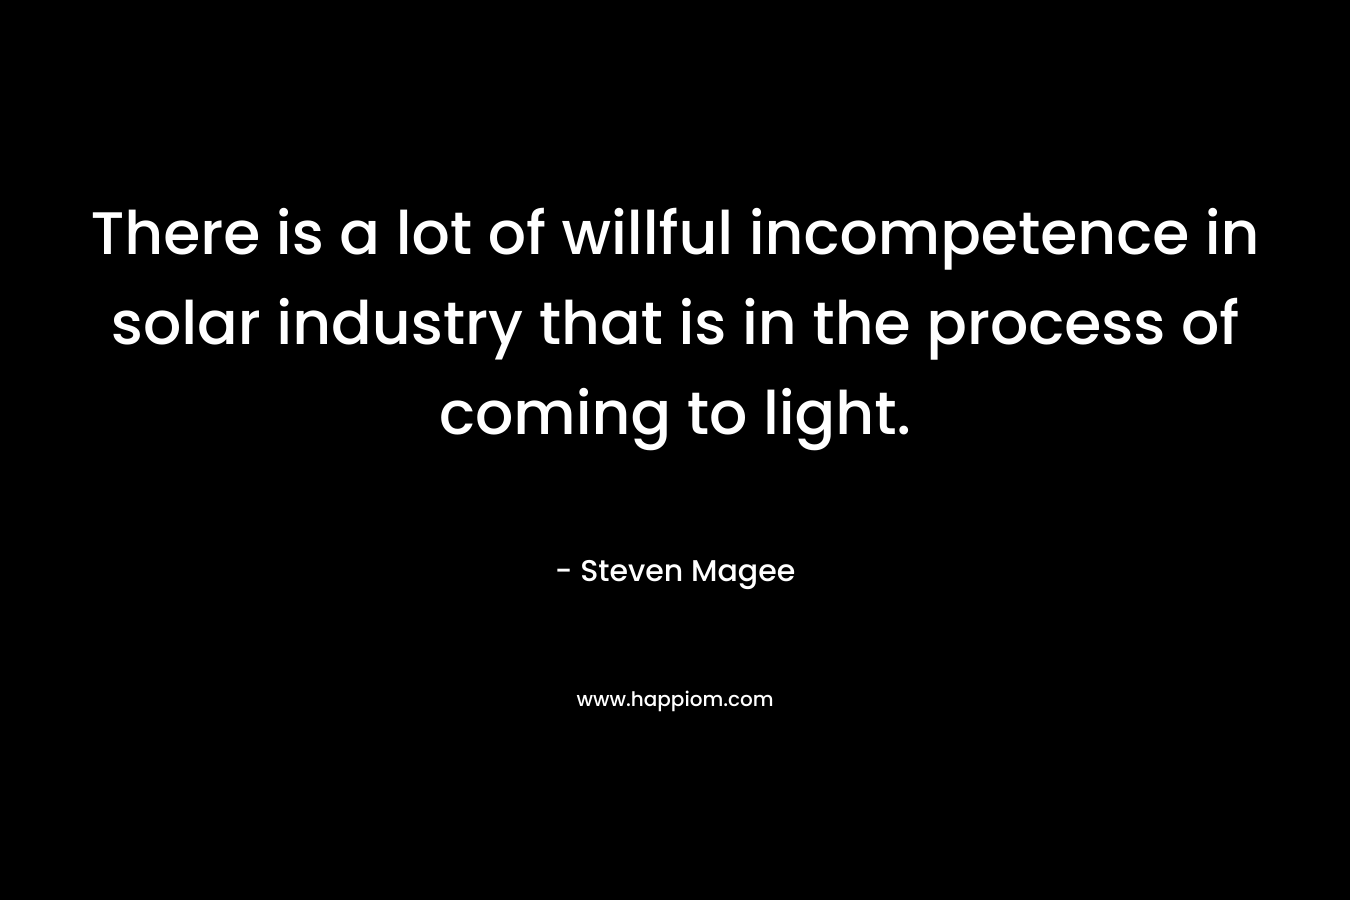 There is a lot of willful incompetence in solar industry that is in the process of coming to light.